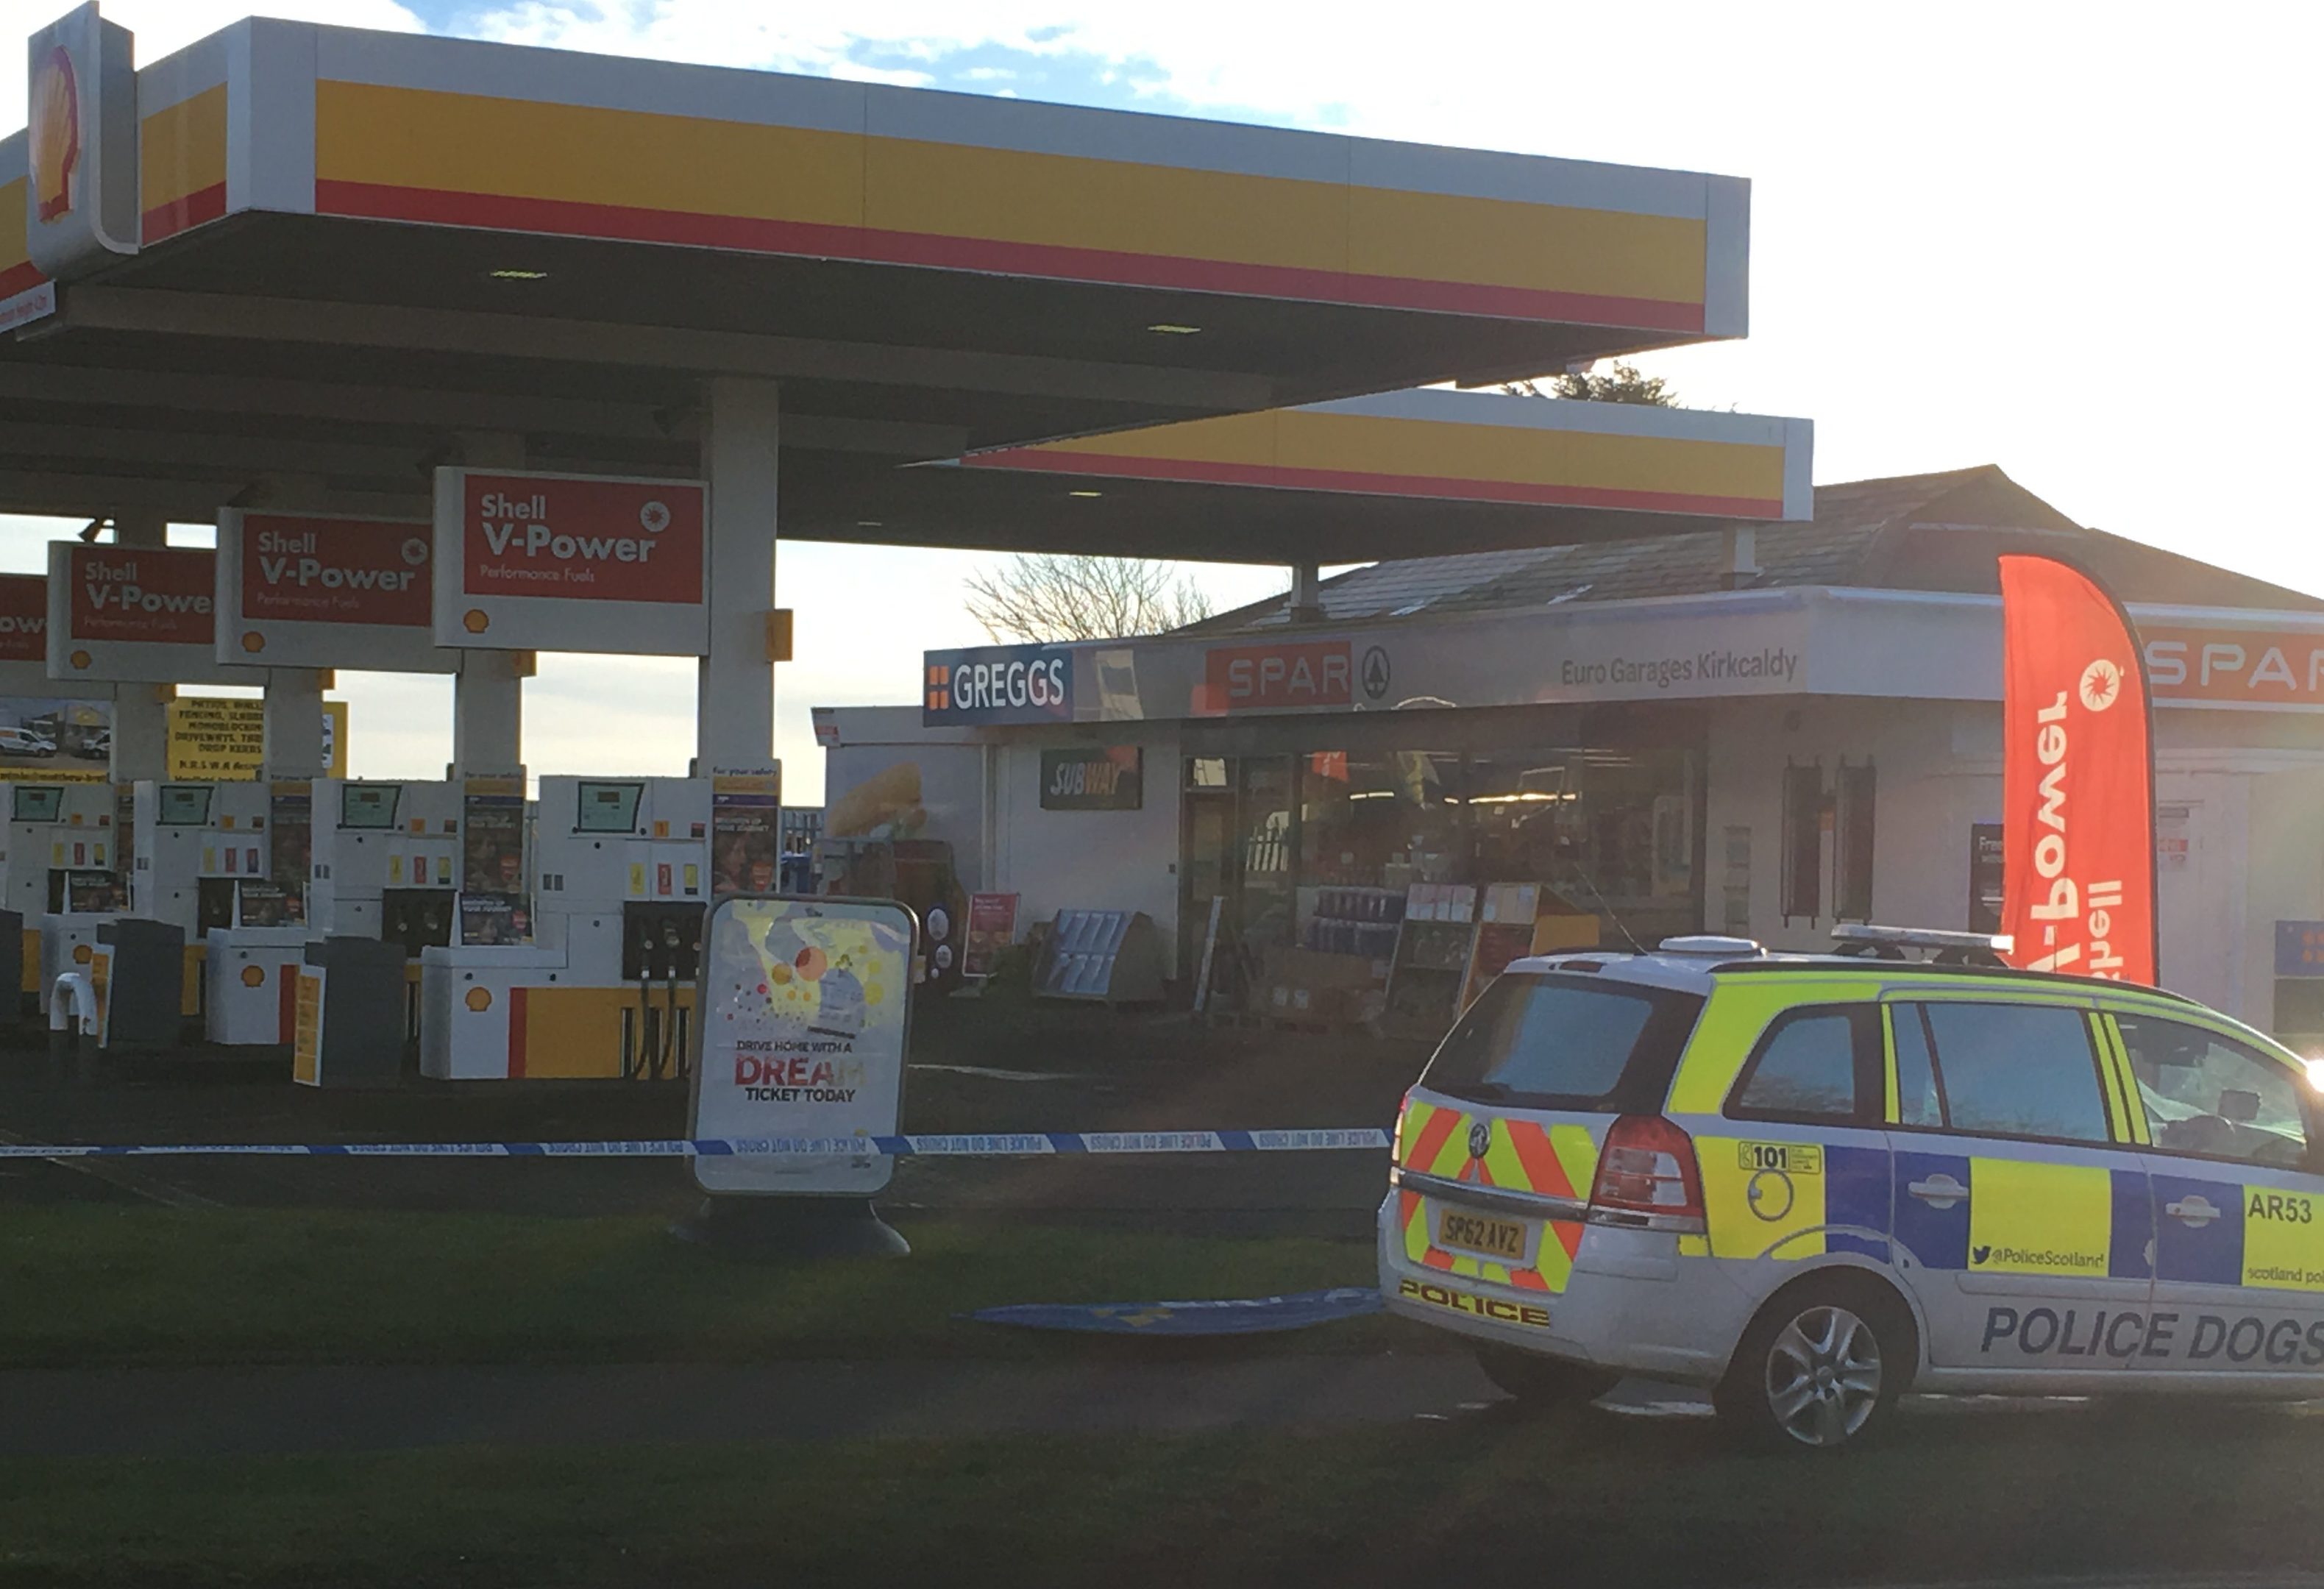 The scene at the Shell garage on Hendry Road.